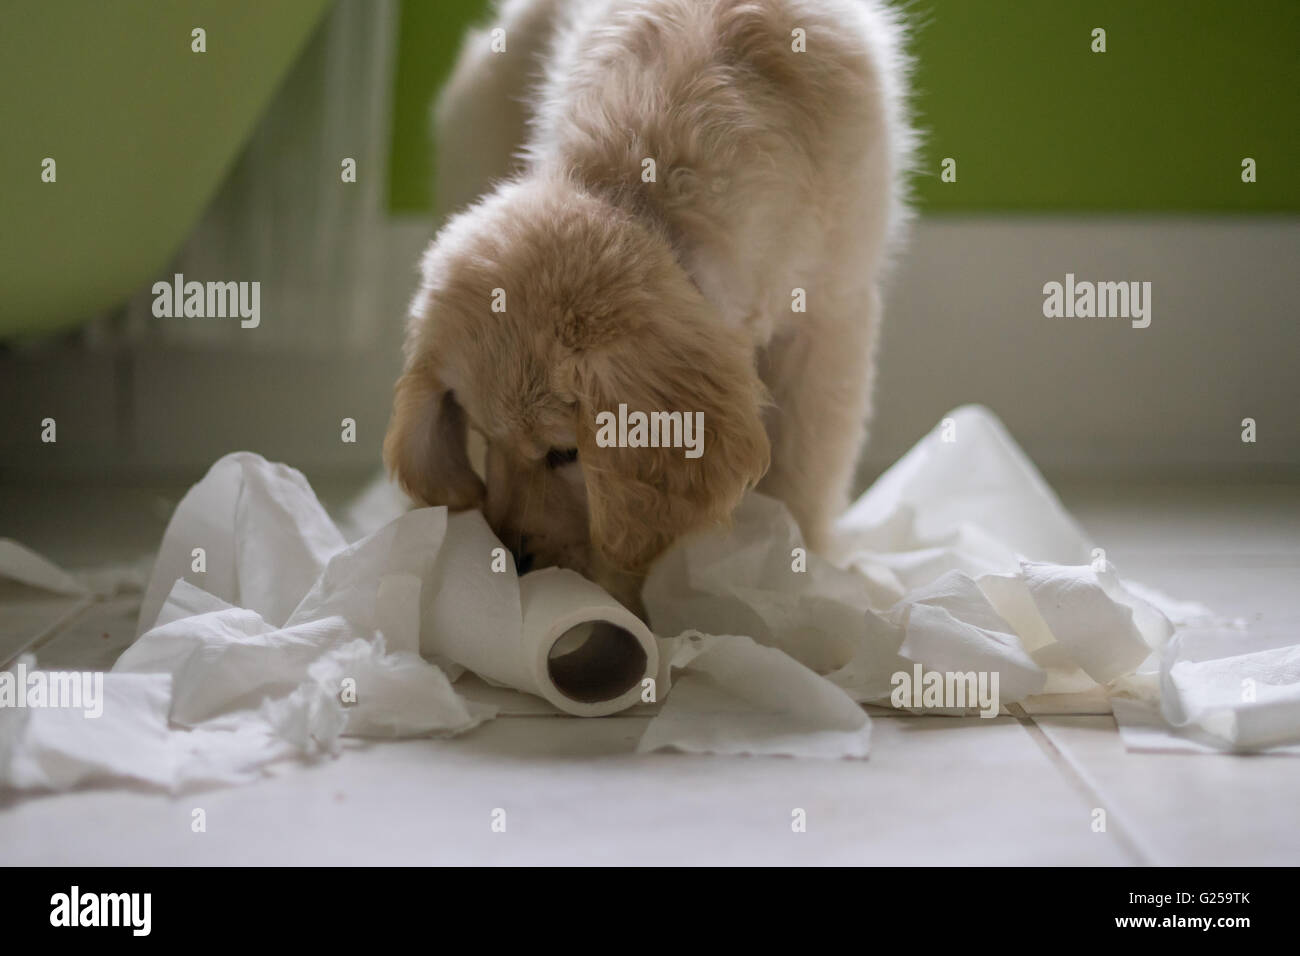 Golden retriever Puppy dog playing with toilet roll in bathroom Stock Photo